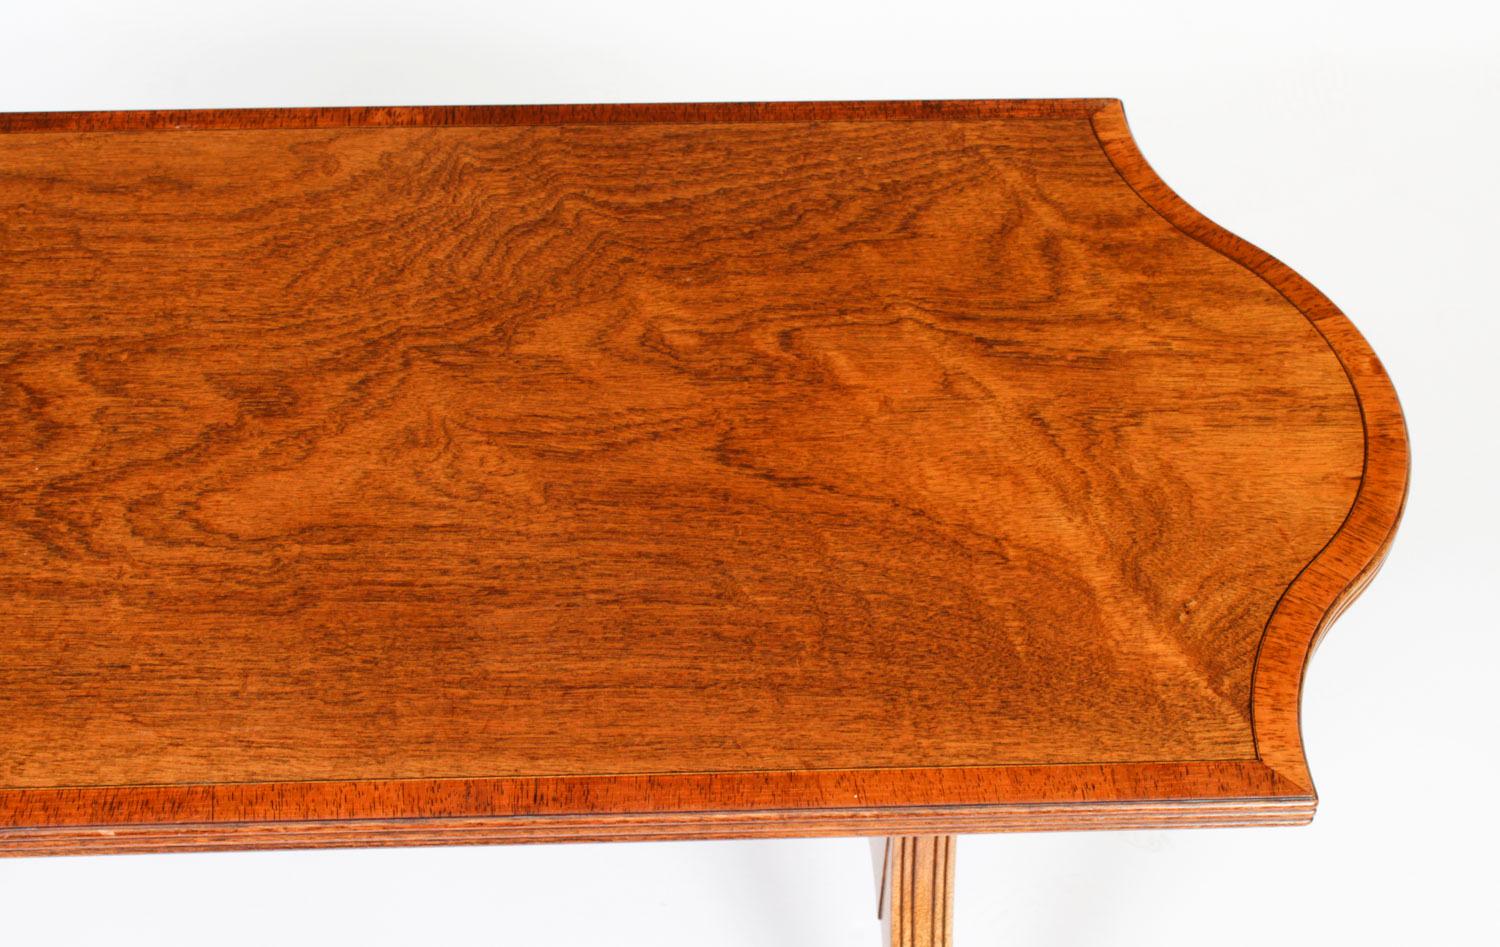 Mahogany Vintage Flame Coffee Table William Tillman 20th Century For Sale